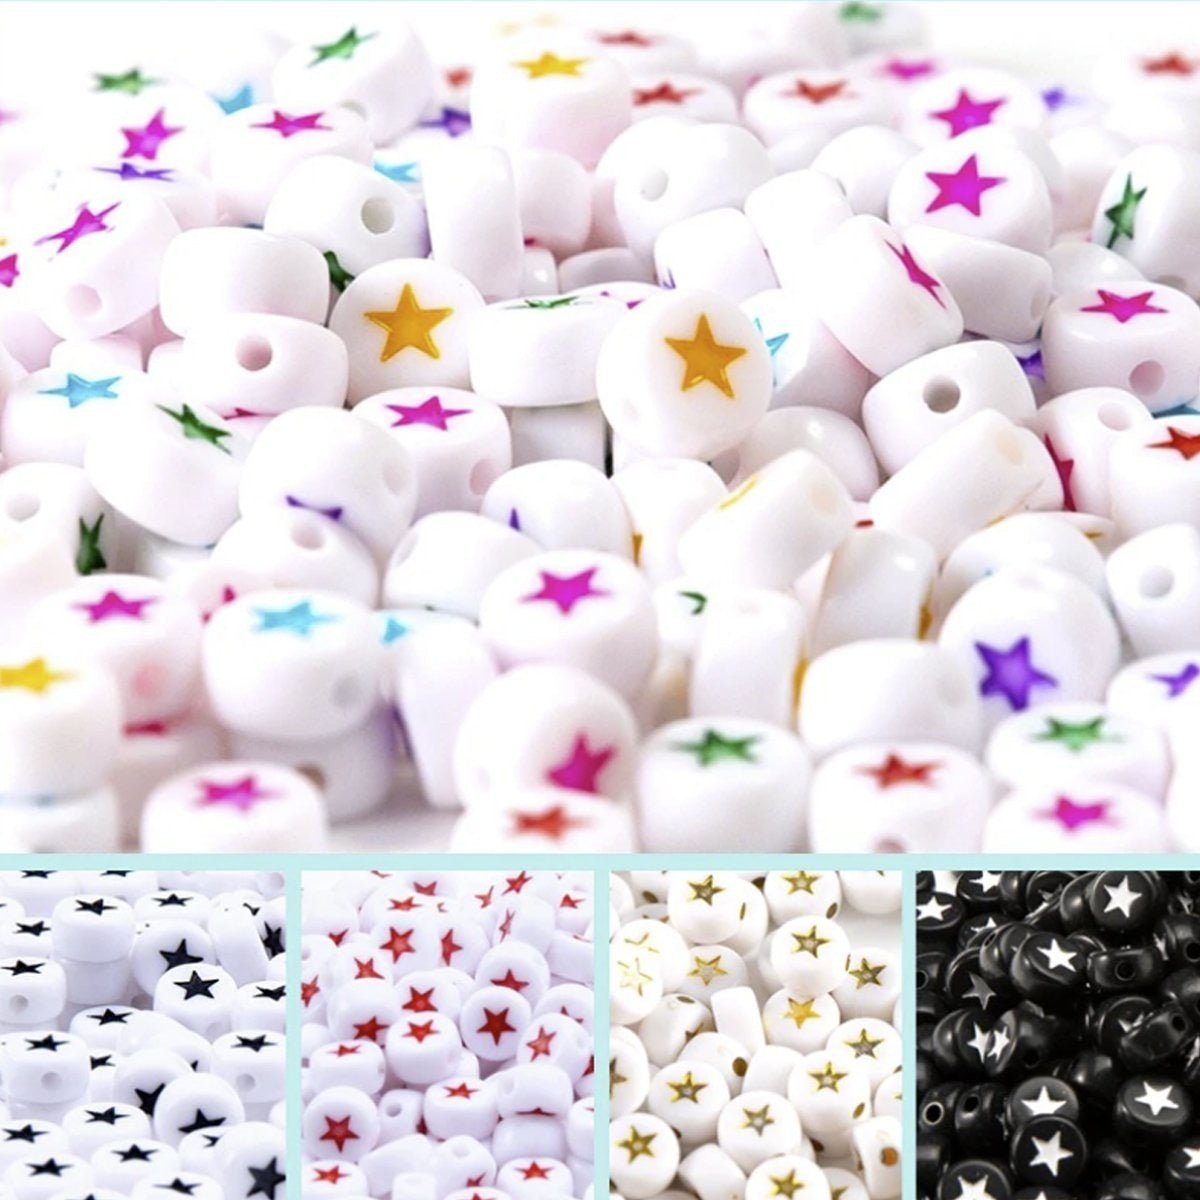 100pcs Star Pattern Beads for Jewellery Making 4mmx7mm Acrylic Craft - Black on White - Asia Sell